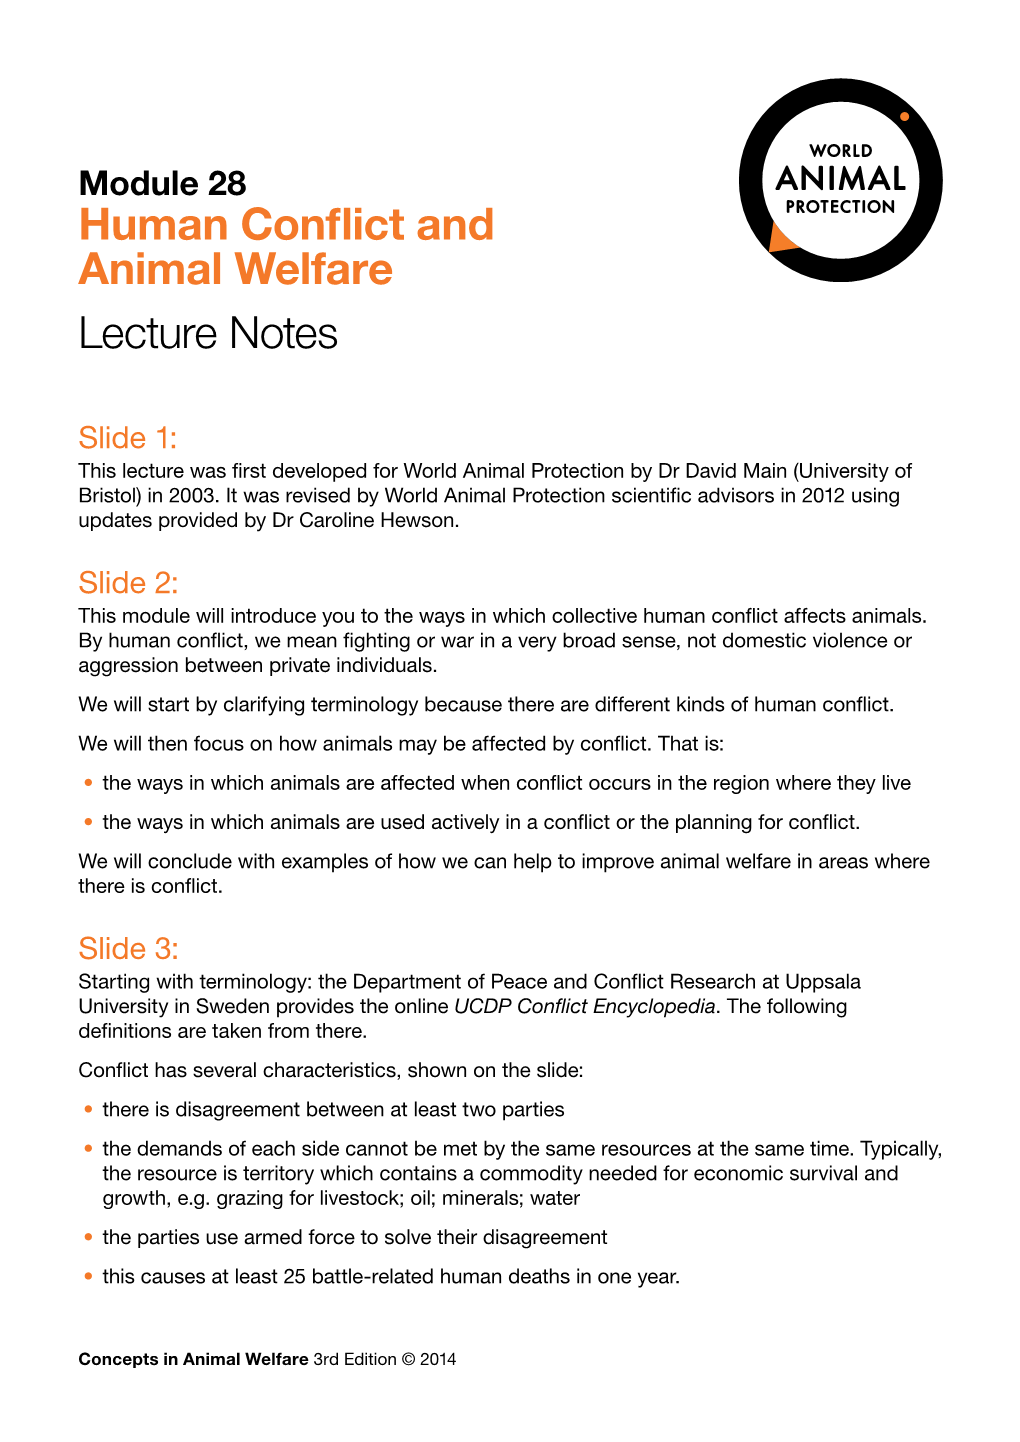 Human Conflict and Animal Welfare Lecture Notes